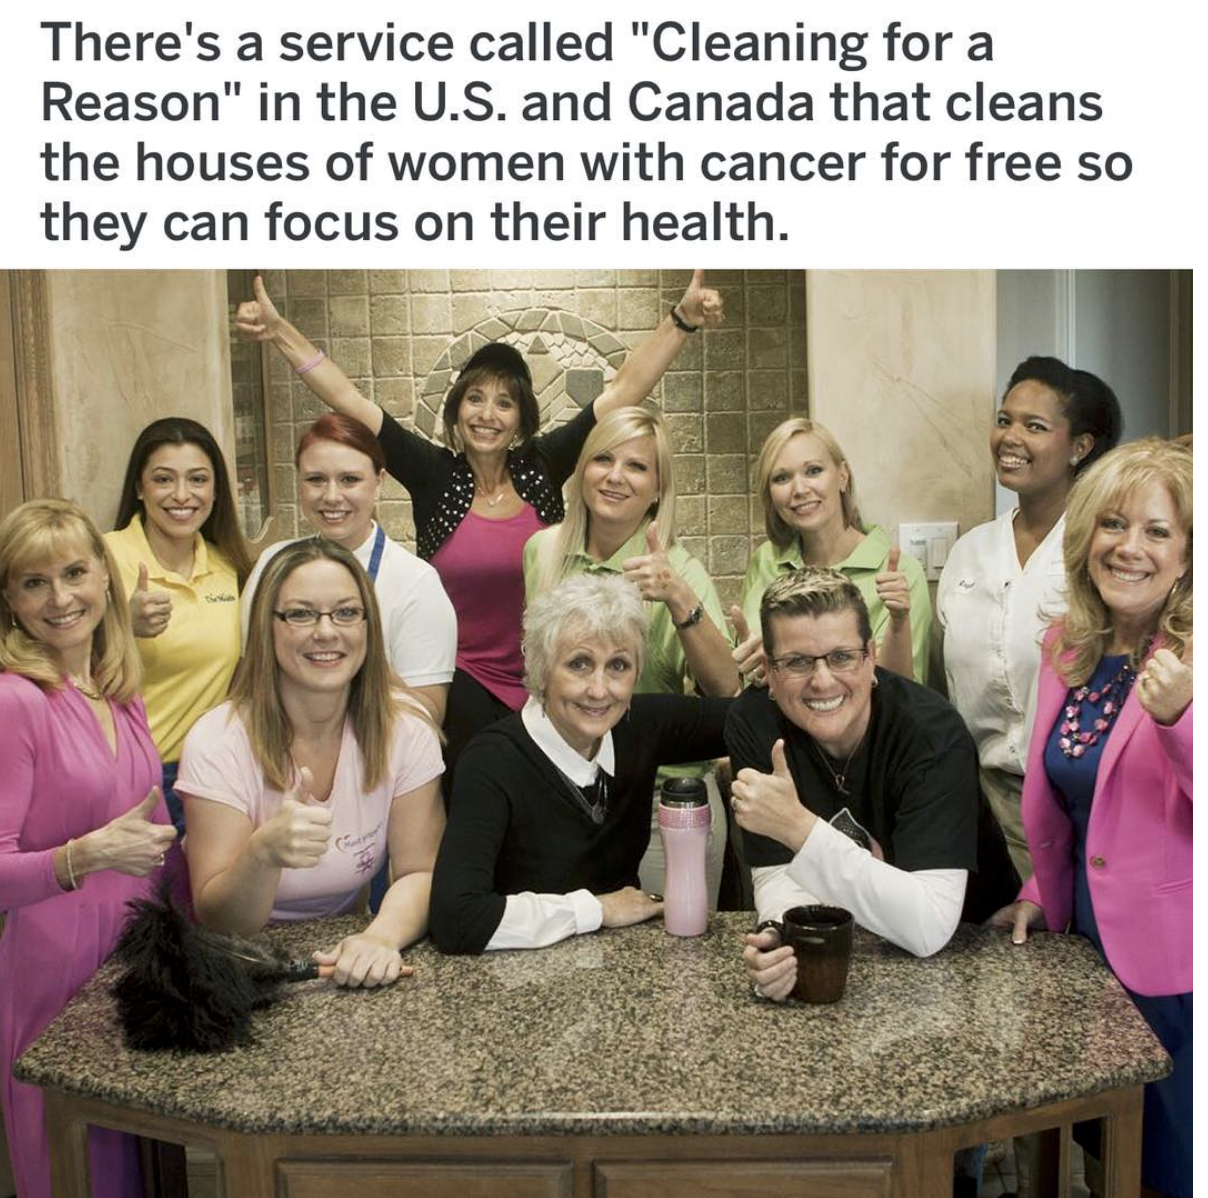 wholesome memes cleans - There's a service called "Cleaning for a Reason" in the U.S. and Canada that cleans the houses of women with cancer for free so they can focus on their health.